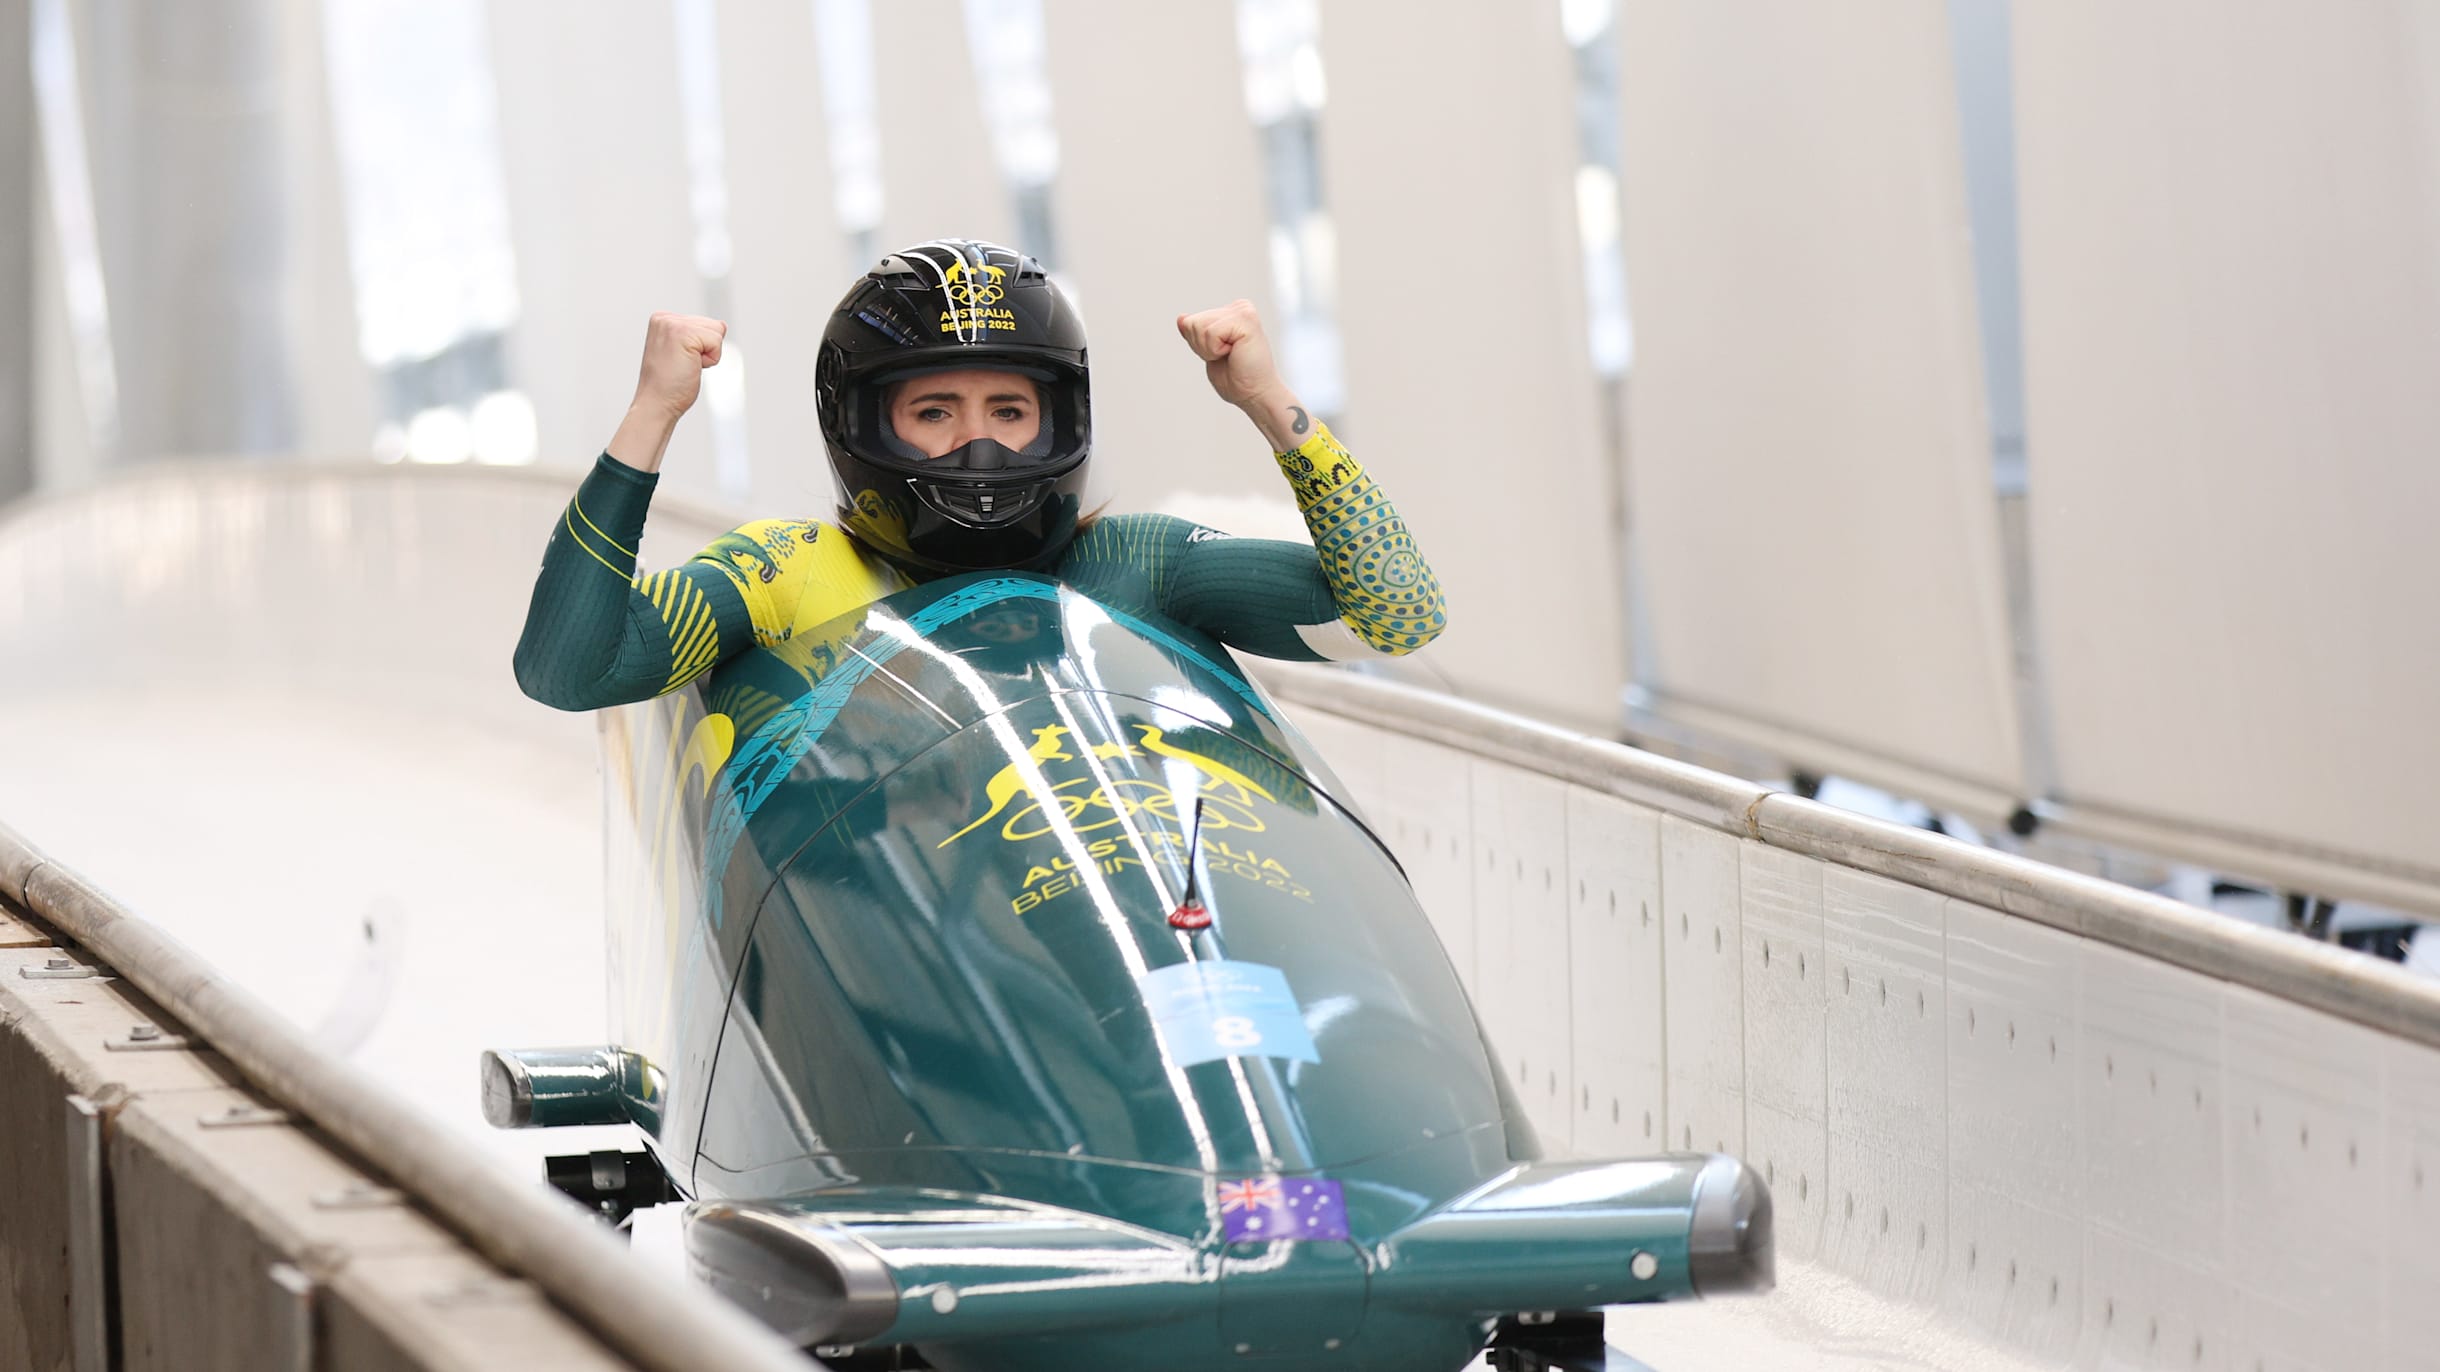 Who is Breeana Walker? The pilot elevating bobsleigh for Australia at Beijing 2022